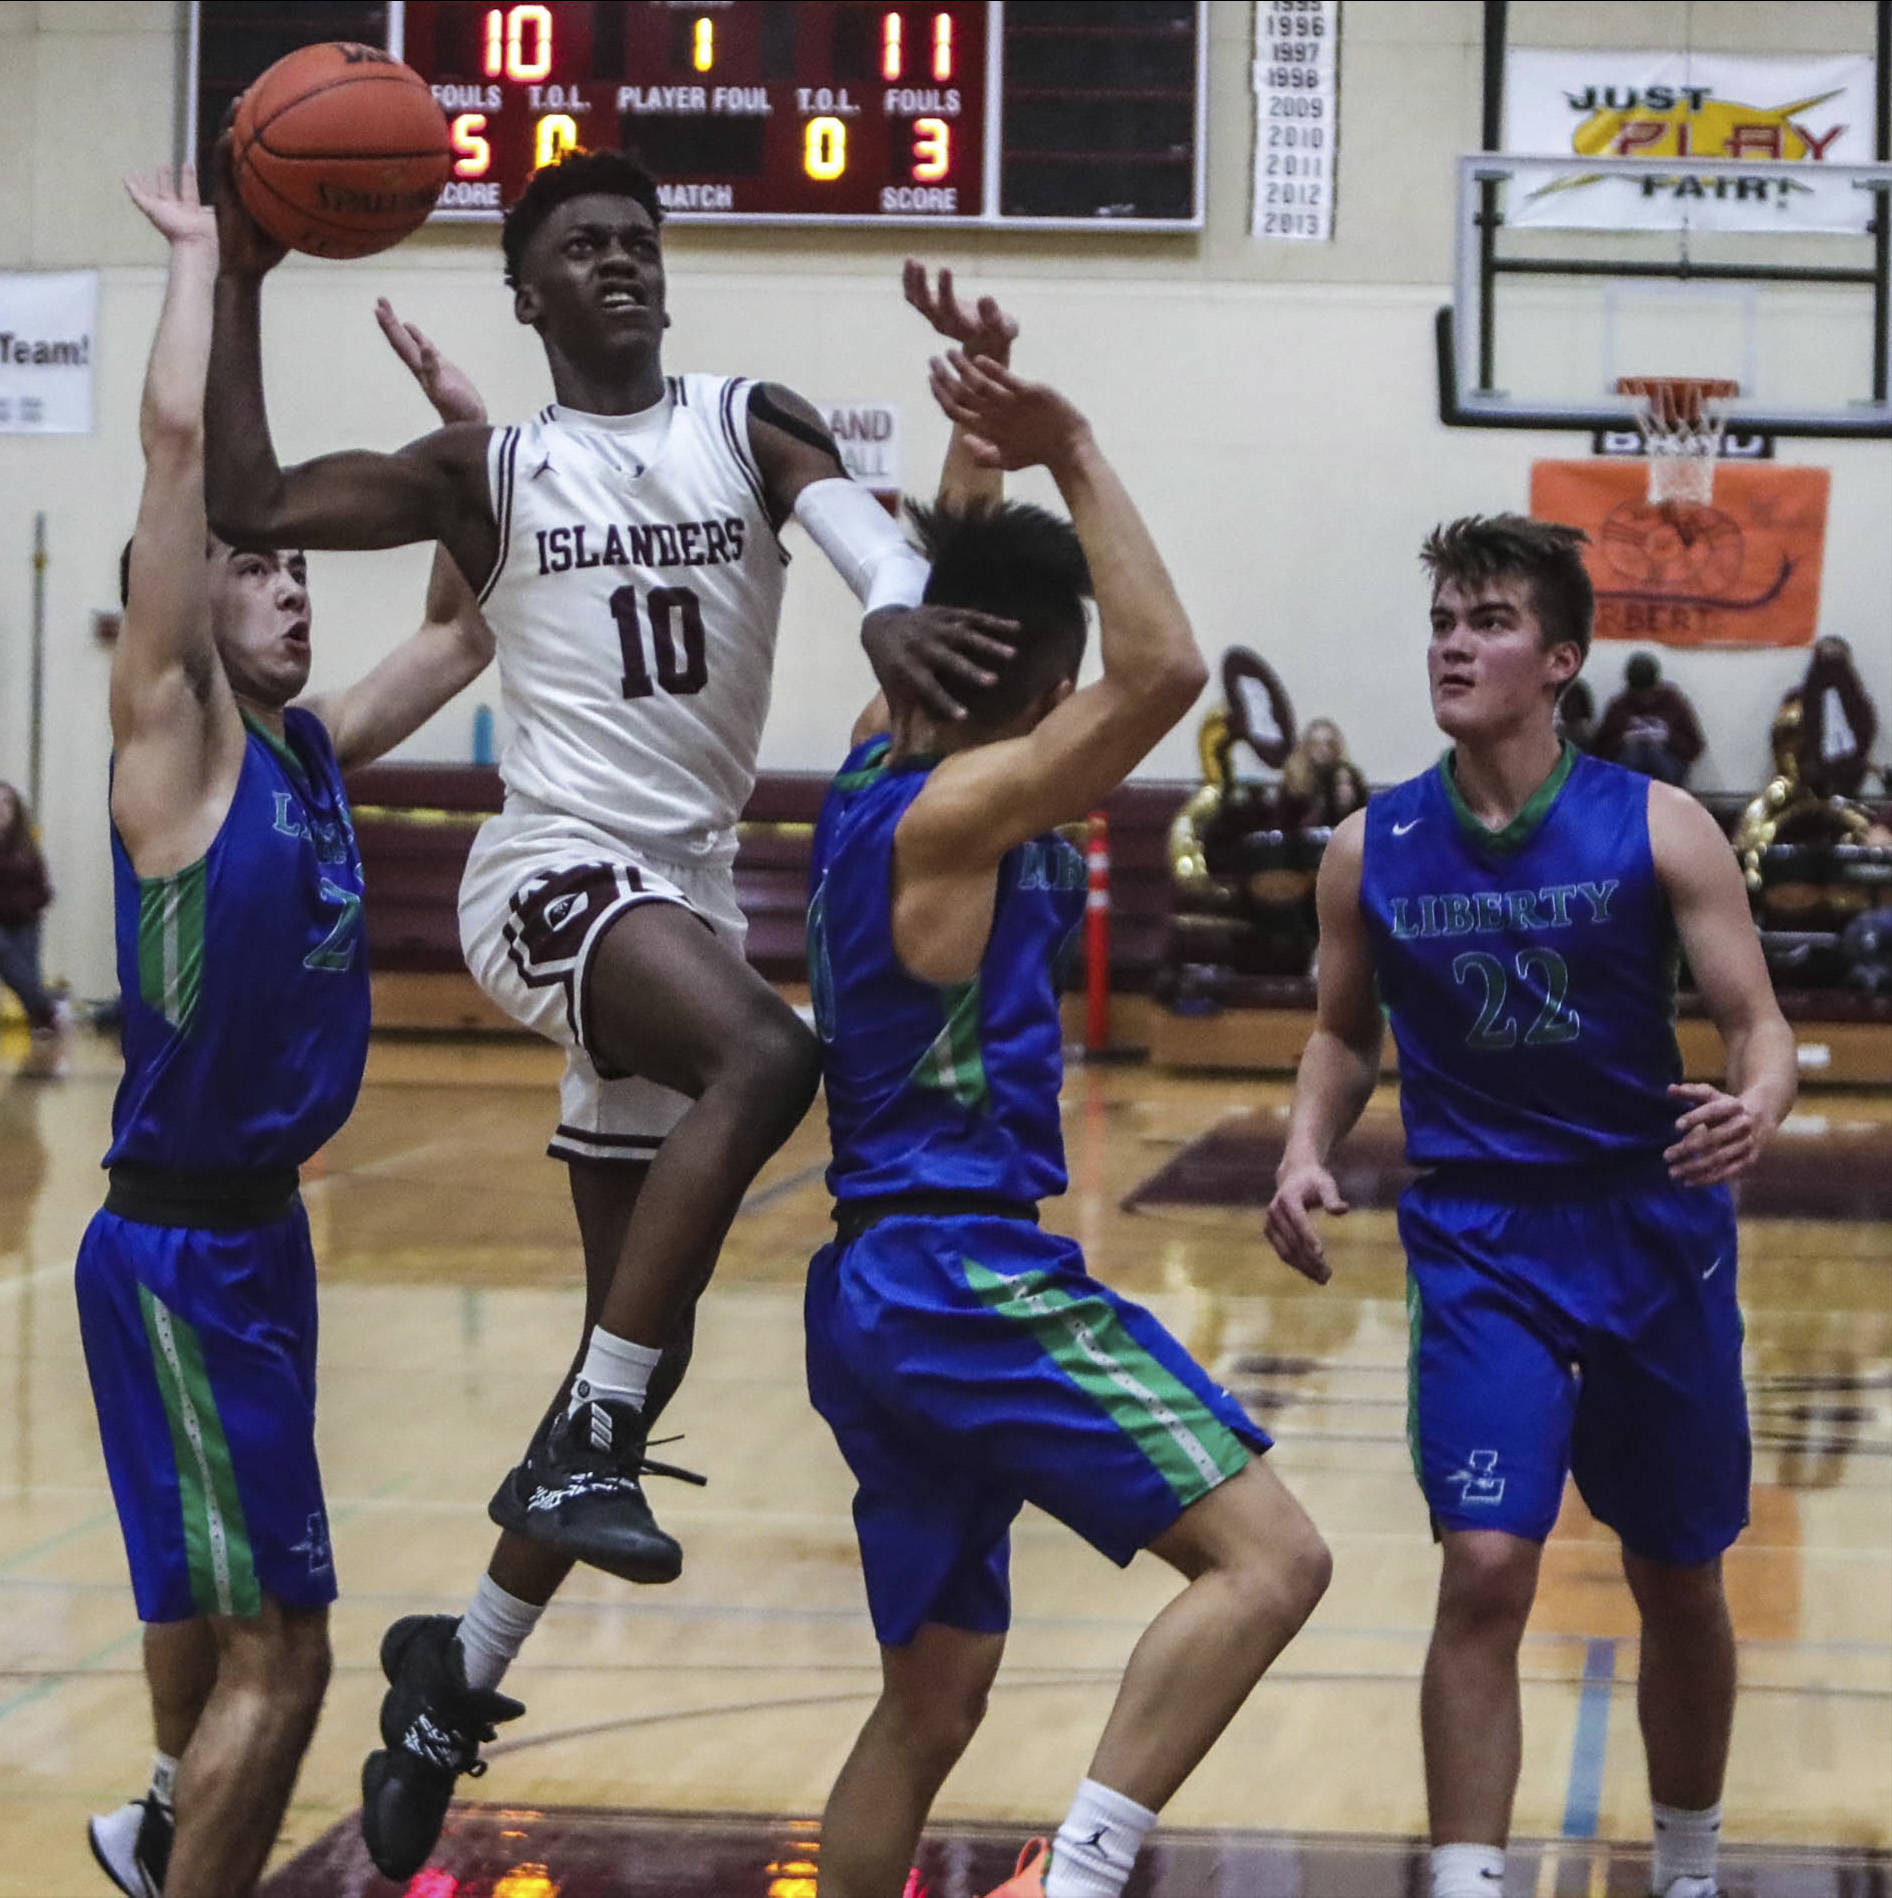 Mercer Island guard Nigel Seda (10) drives to the hoop during the Islanders’ 65-49 victory over the Liberty Patriots on Dec. 10. Photo courtesy of Don Borin/Stop Action Photography